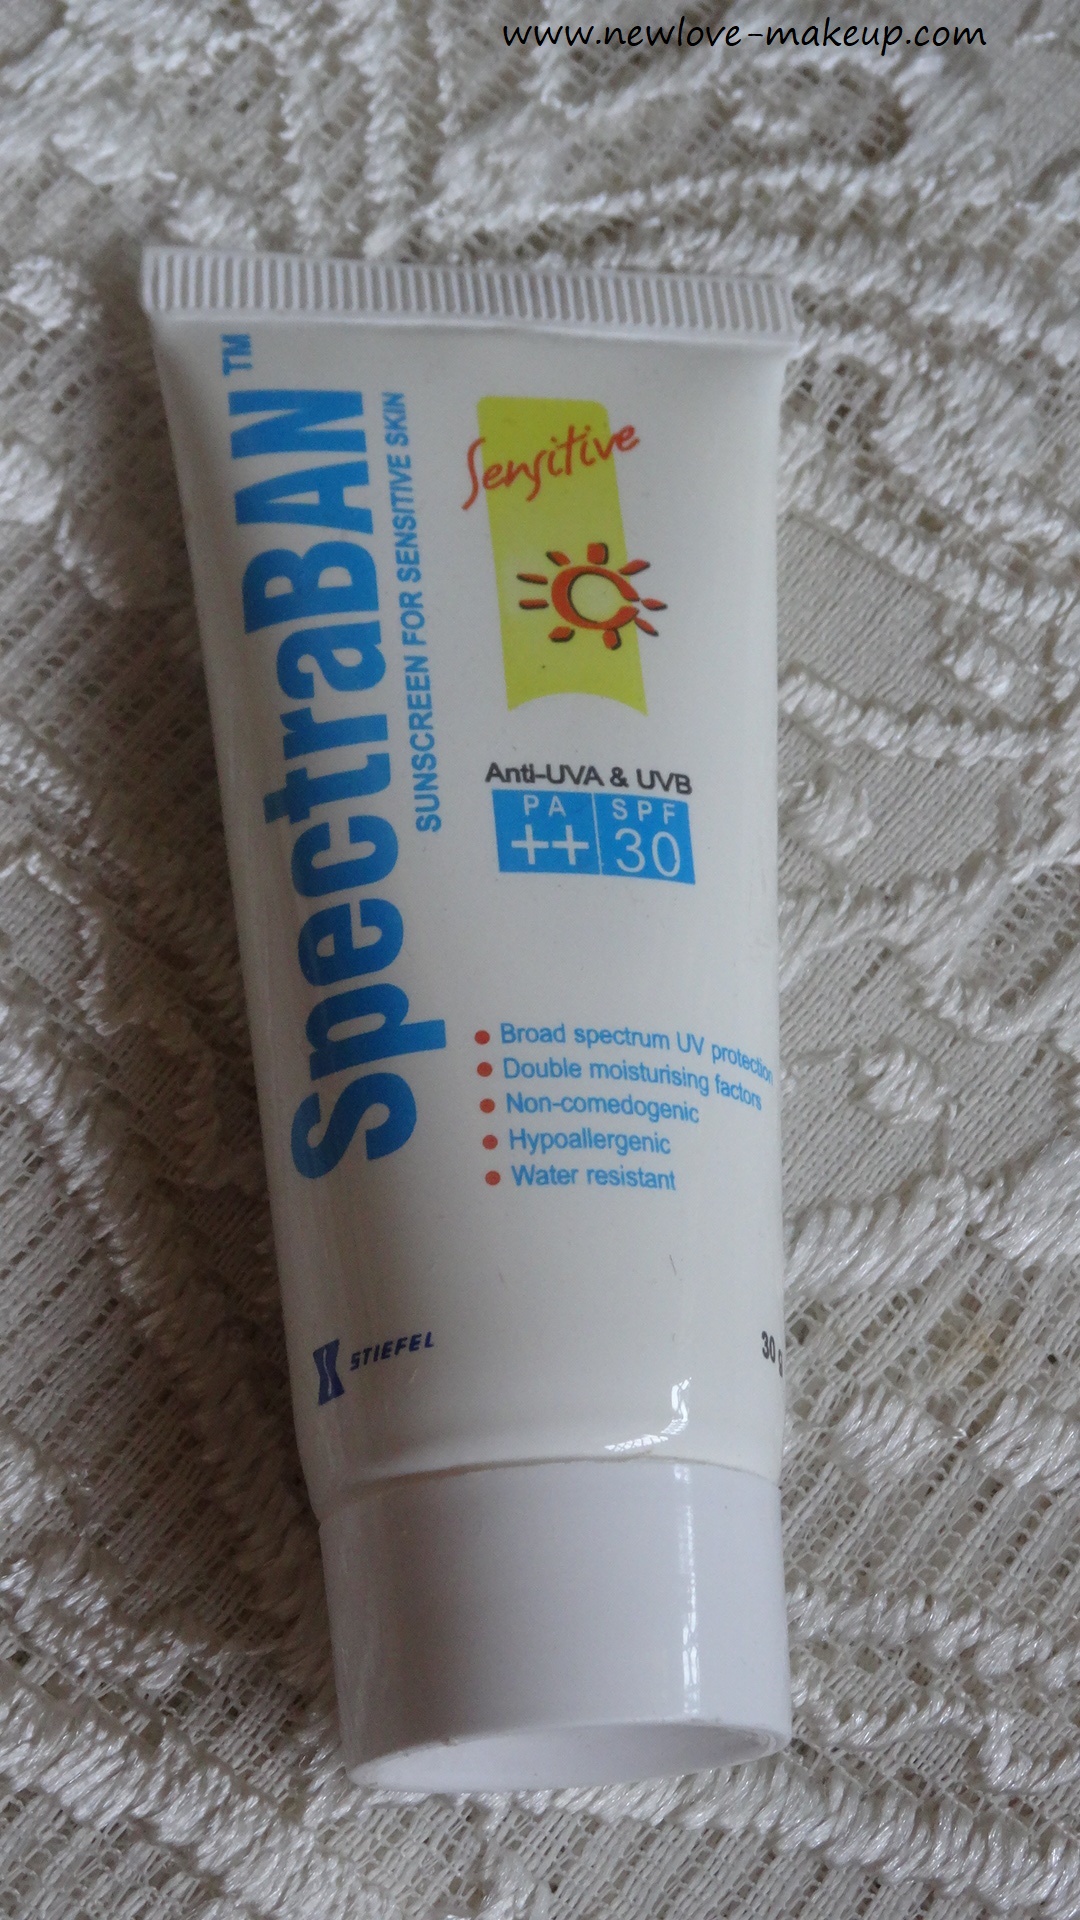 SpectraBan Sunscreen [STIEFEL] for Sensitive Skin SPF 30 Review